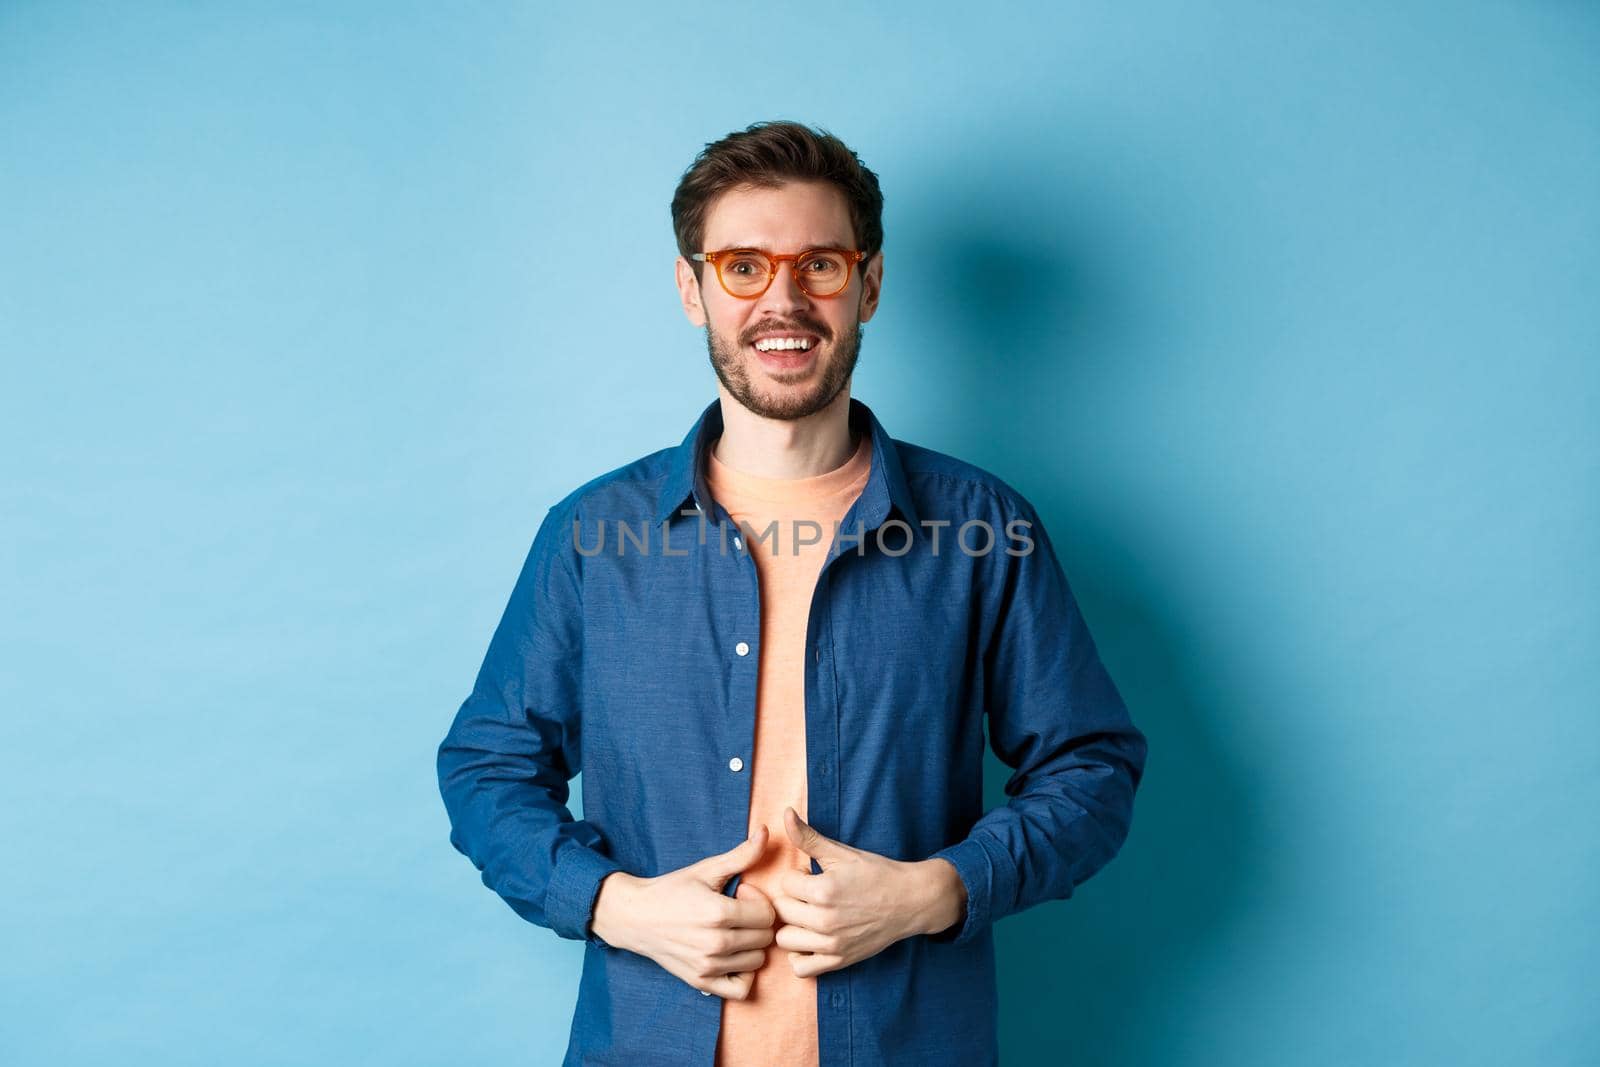 Handsome bearded man smiling pleased, wearing new glasses, standing on blue background.